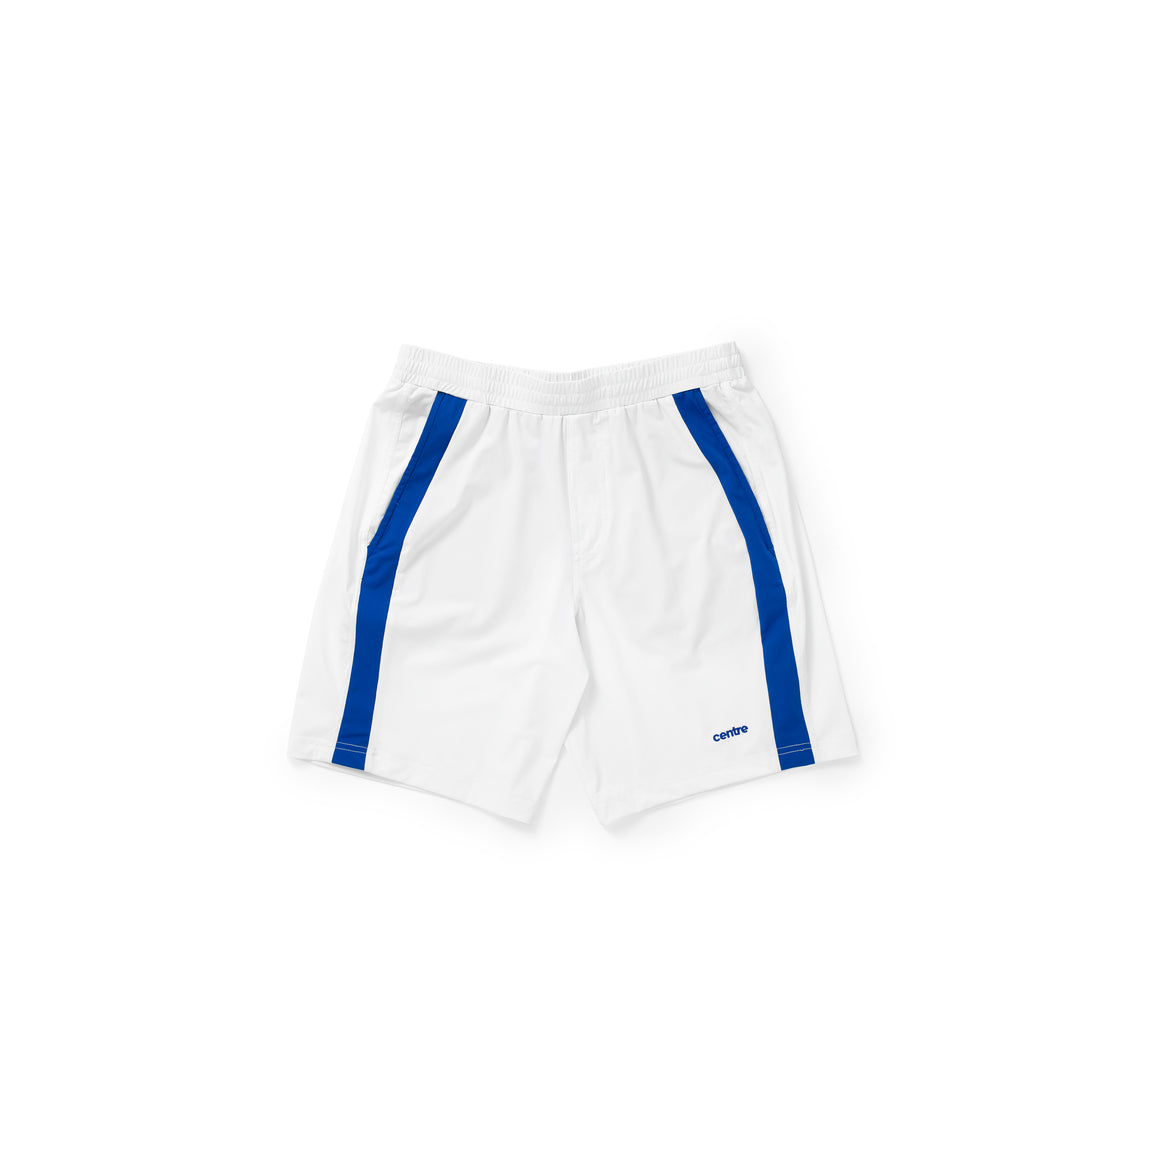 Parnell Short in Bright White